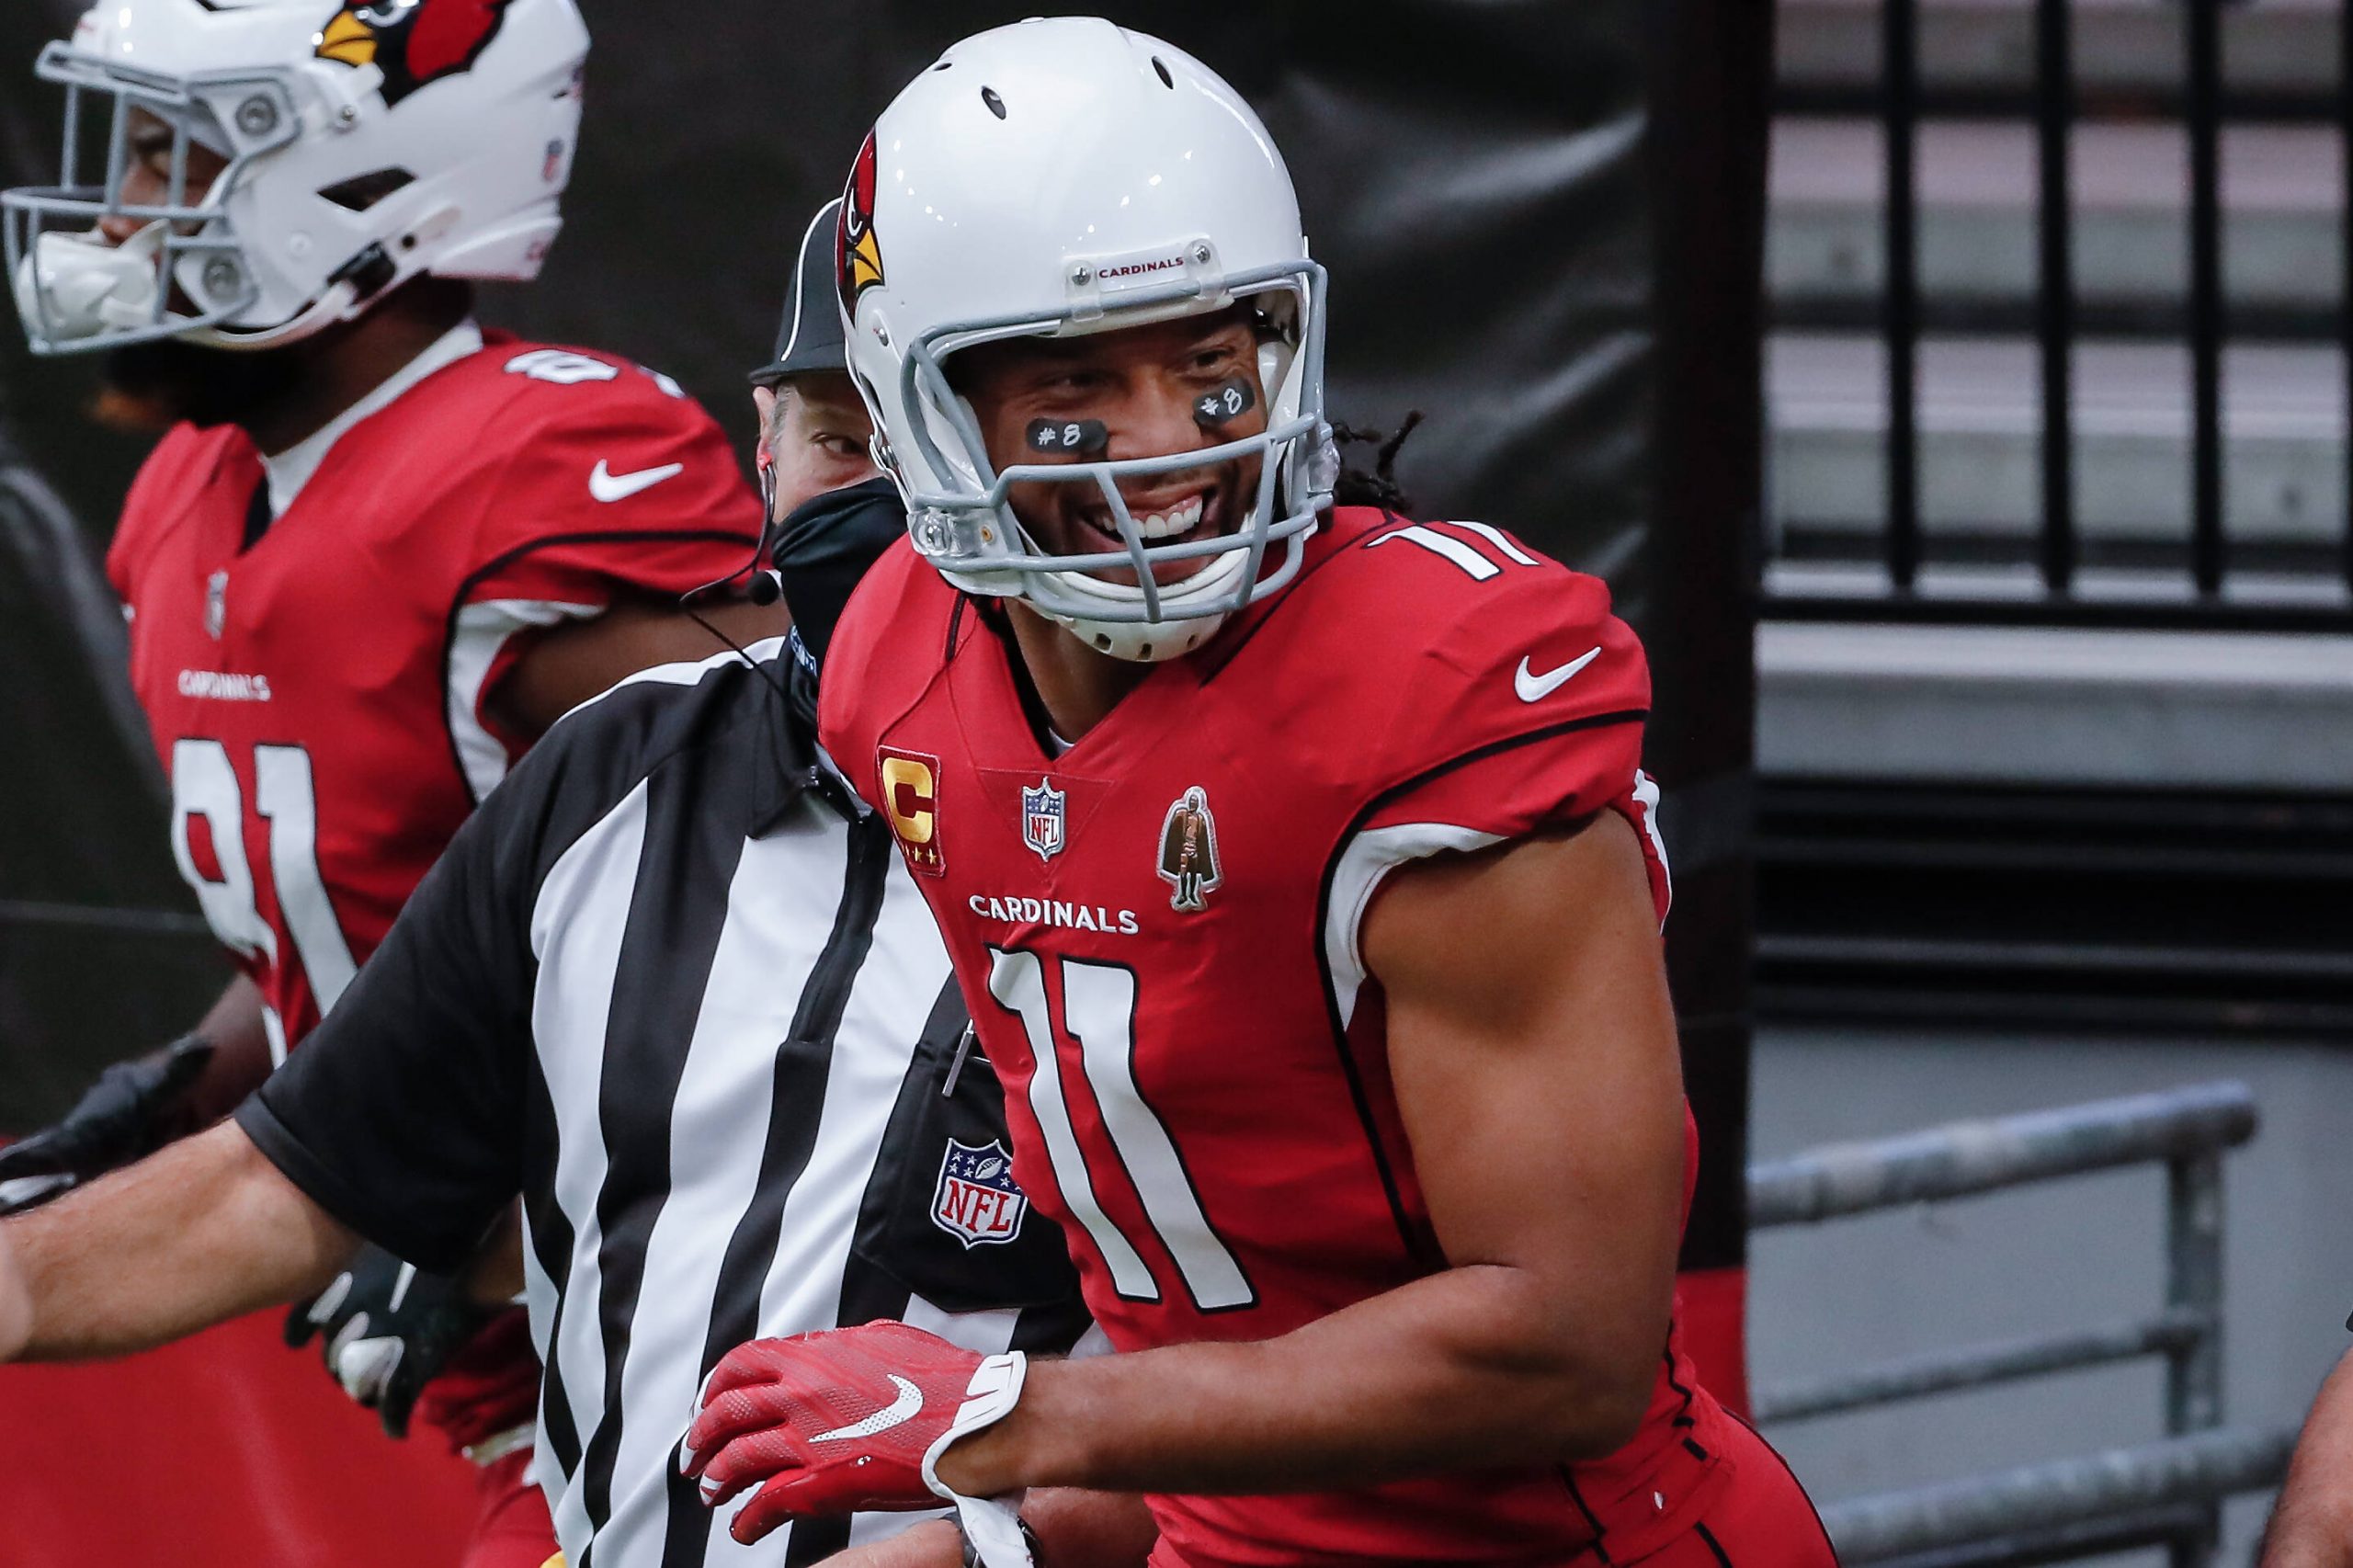 GLENDALE, AZ - SEPTEMBER 20: Arizona Cardinals wide receiver Larry Fitzgerald (11) smiles before the NFL, American Footb